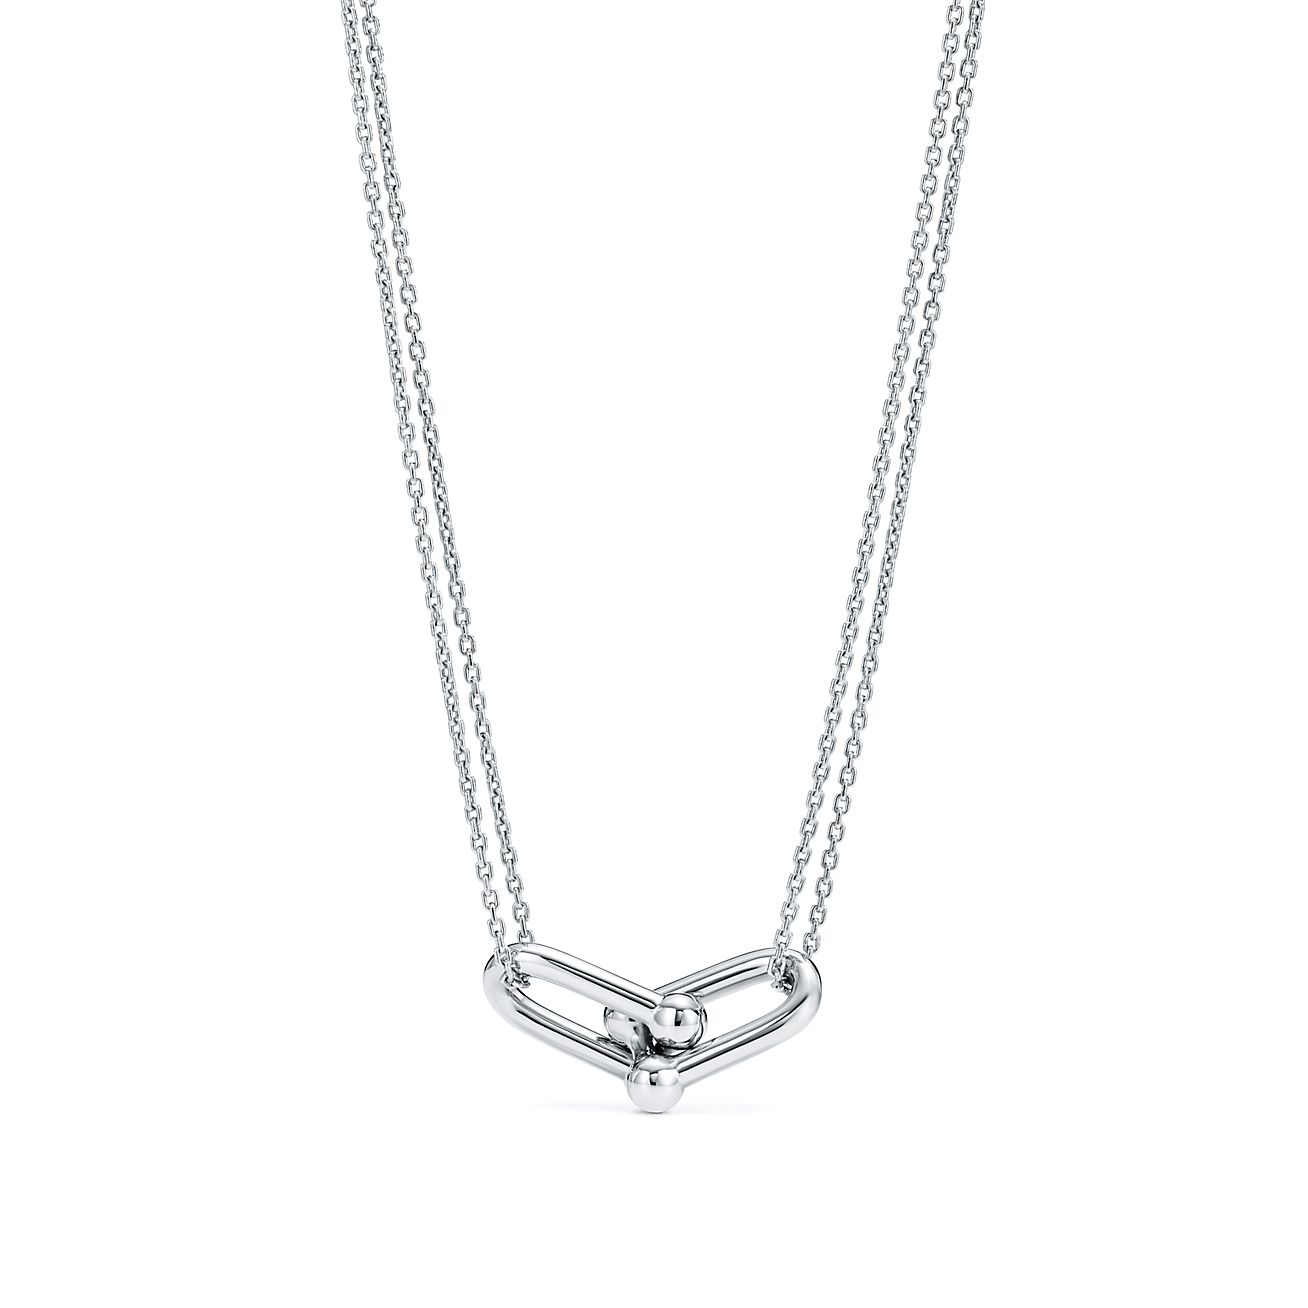 Tiffany & Co. Sterling Silver Padlock Link Necklace, Tiffany & Co.